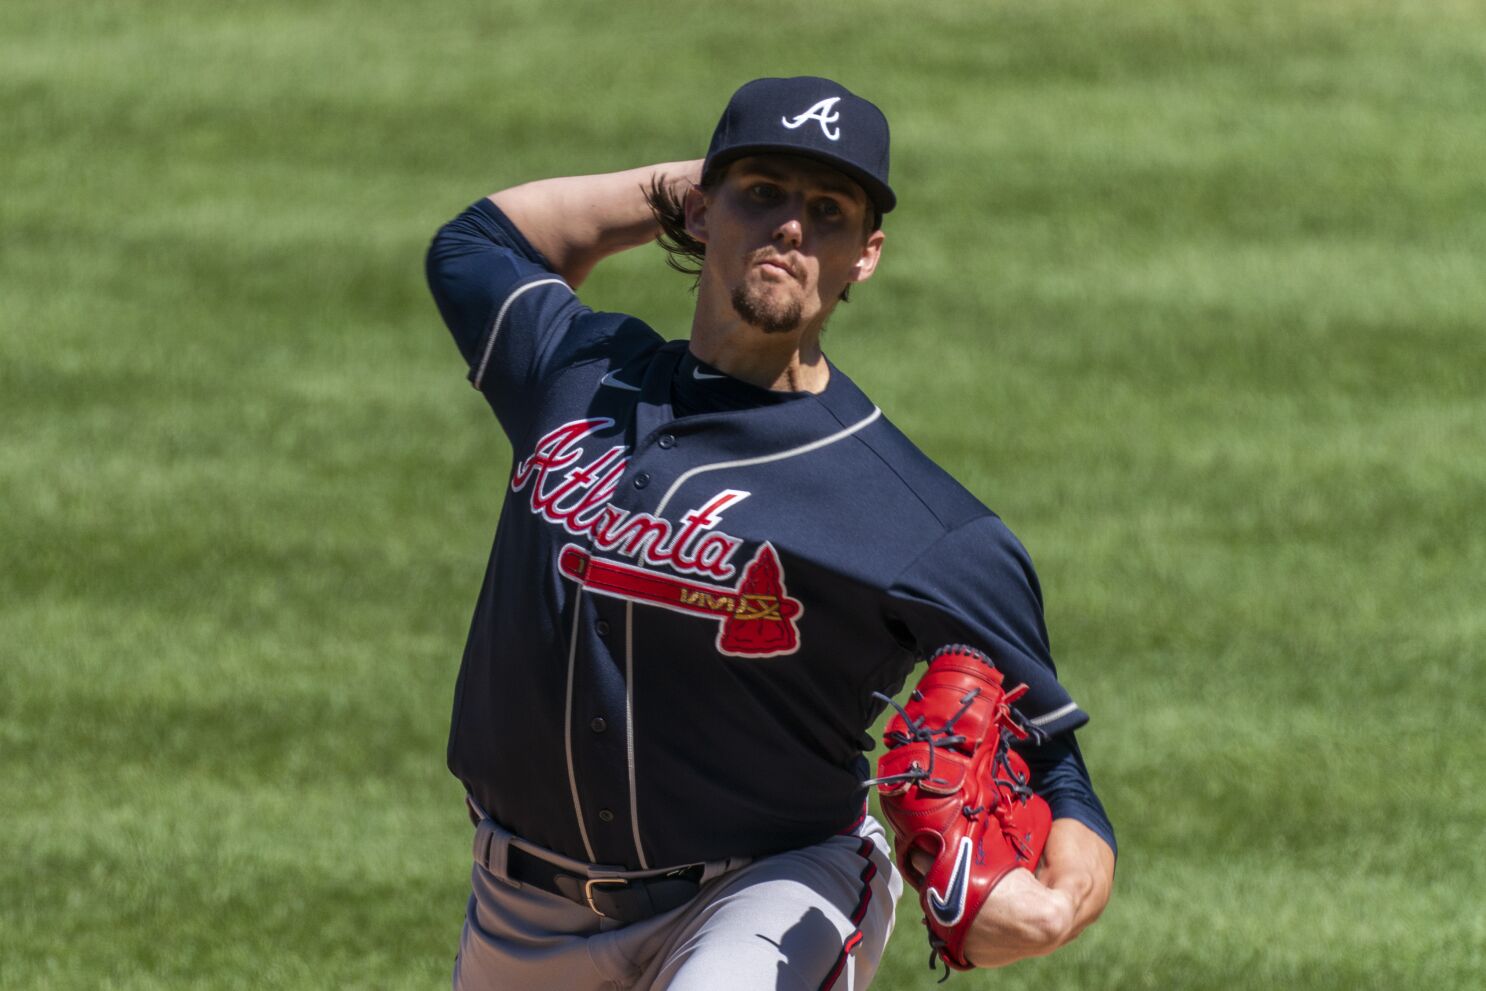 Duvall, Albies power Braves to 8-4 triumph over Nationals